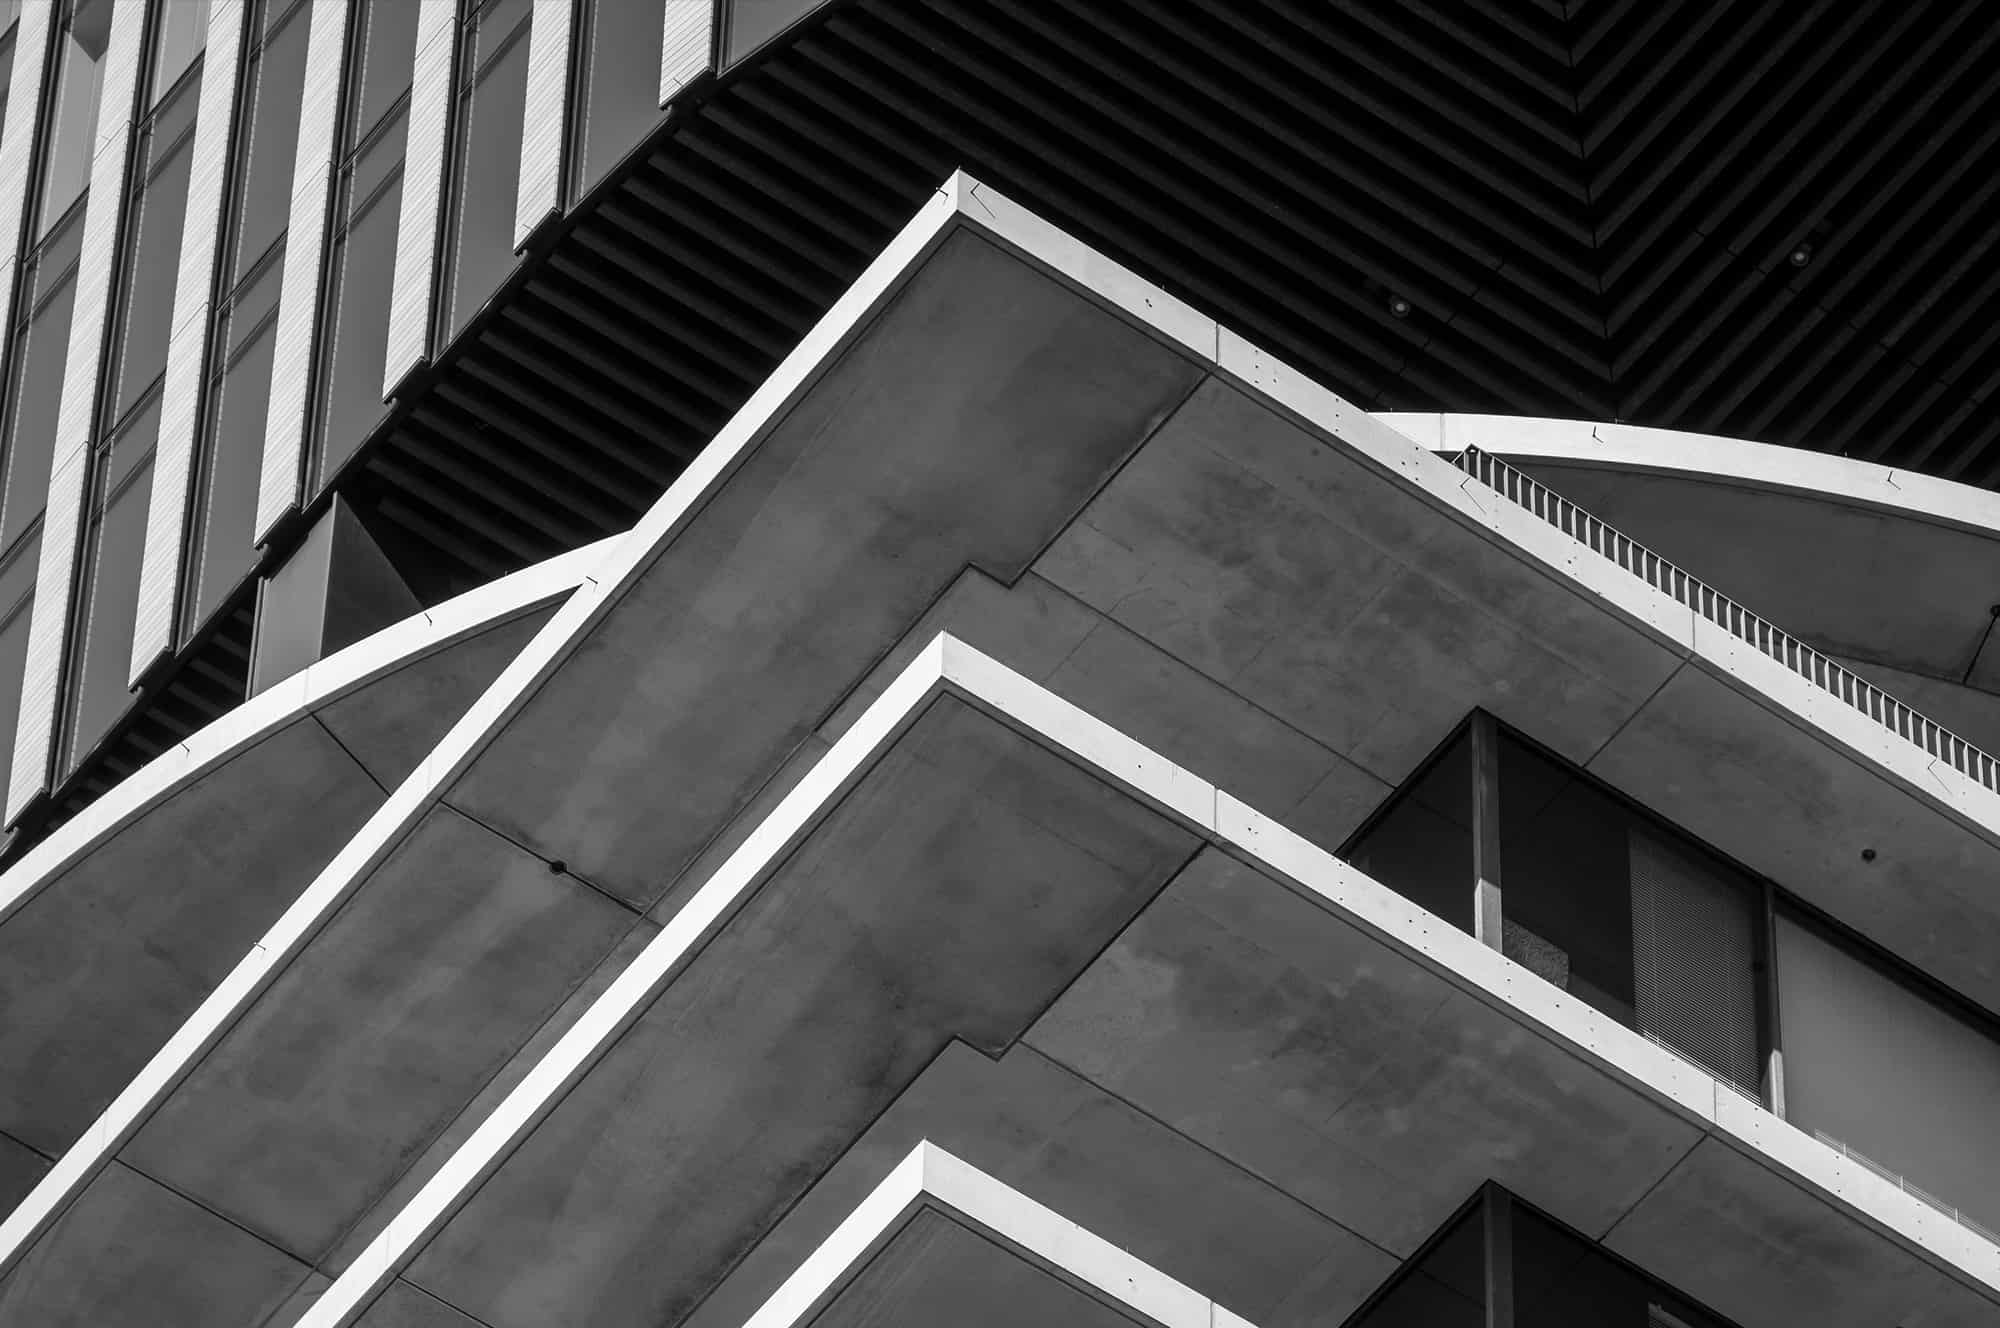 Monochrome image of a modern building showcasing angular architectural details and contrasting textures.